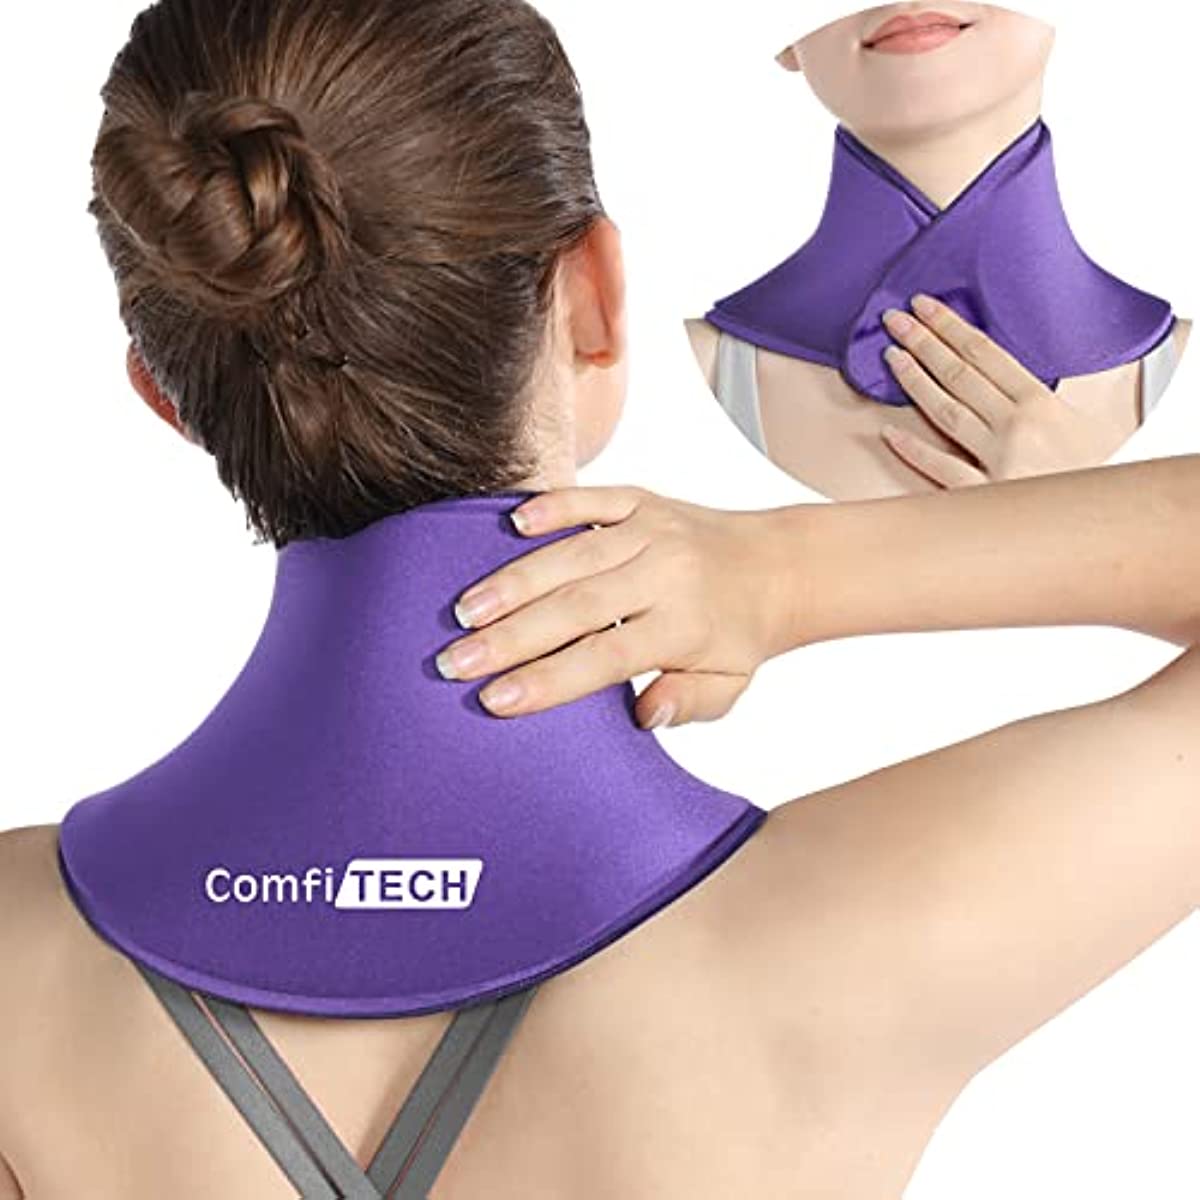 ComfiTECH Neck Ice Pack Wrap Gel Reusable Ice Packs for Neck Pain Relief (Purple) & Migraine Ice Head Wrap, Headache Relief Hat for Migraine (Rose Red)